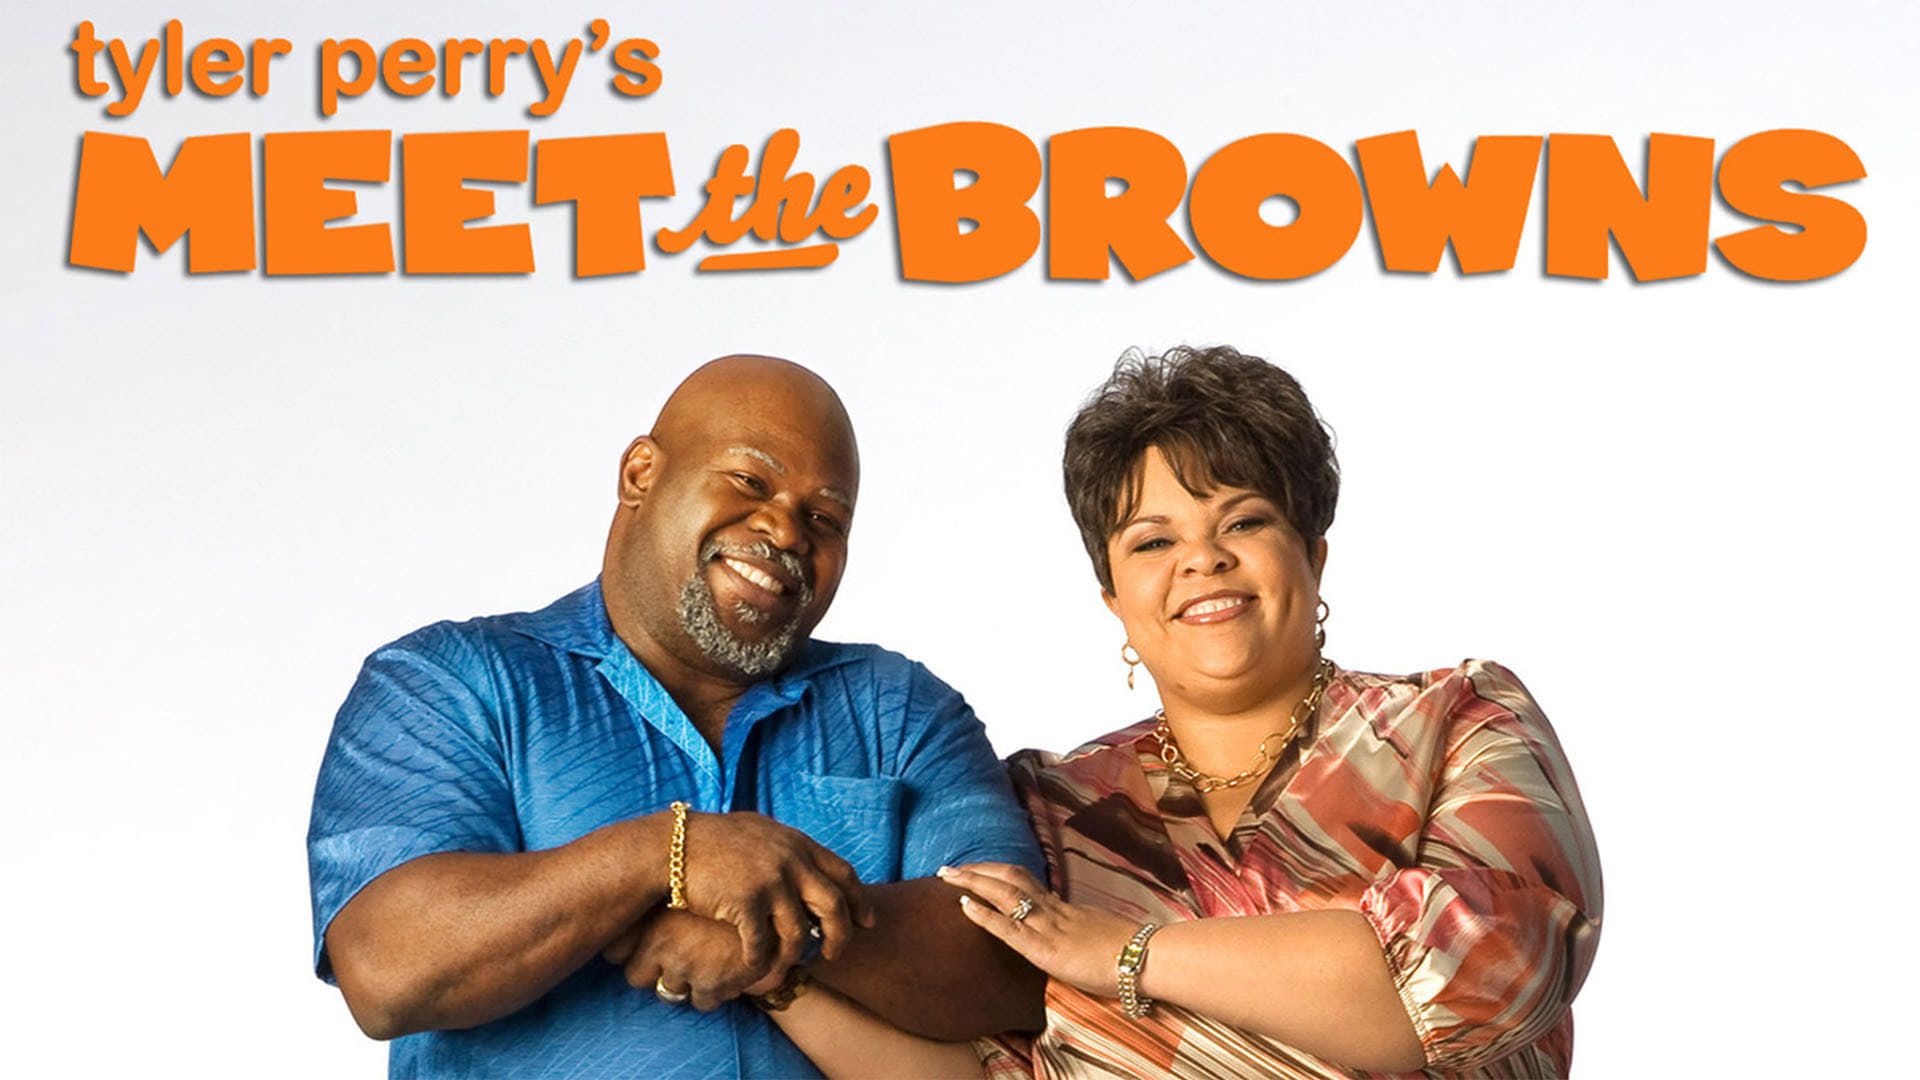 Meet the Browns background